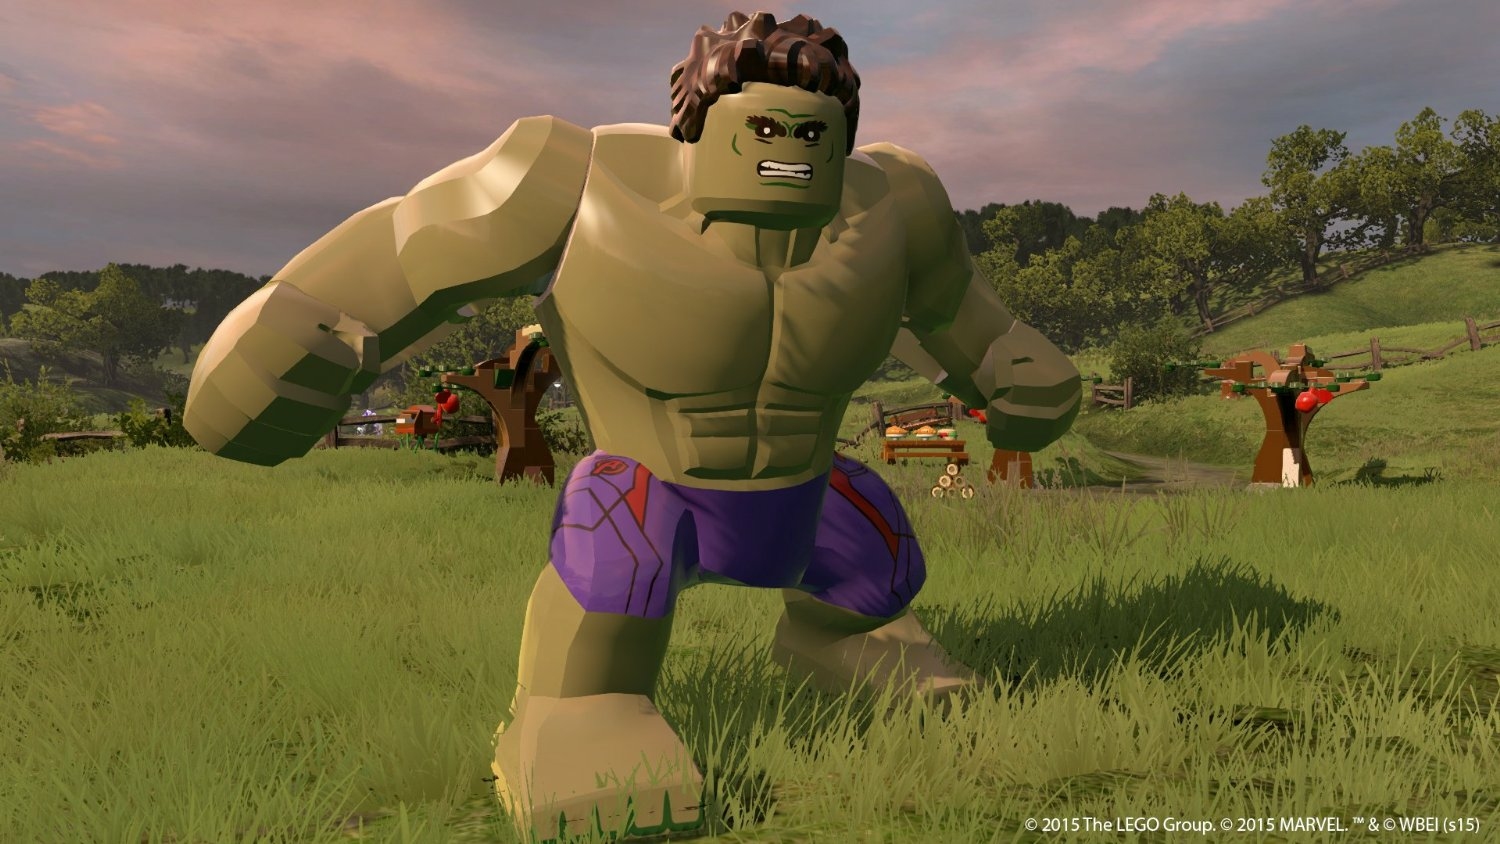 lego marvel avengers pc requirements